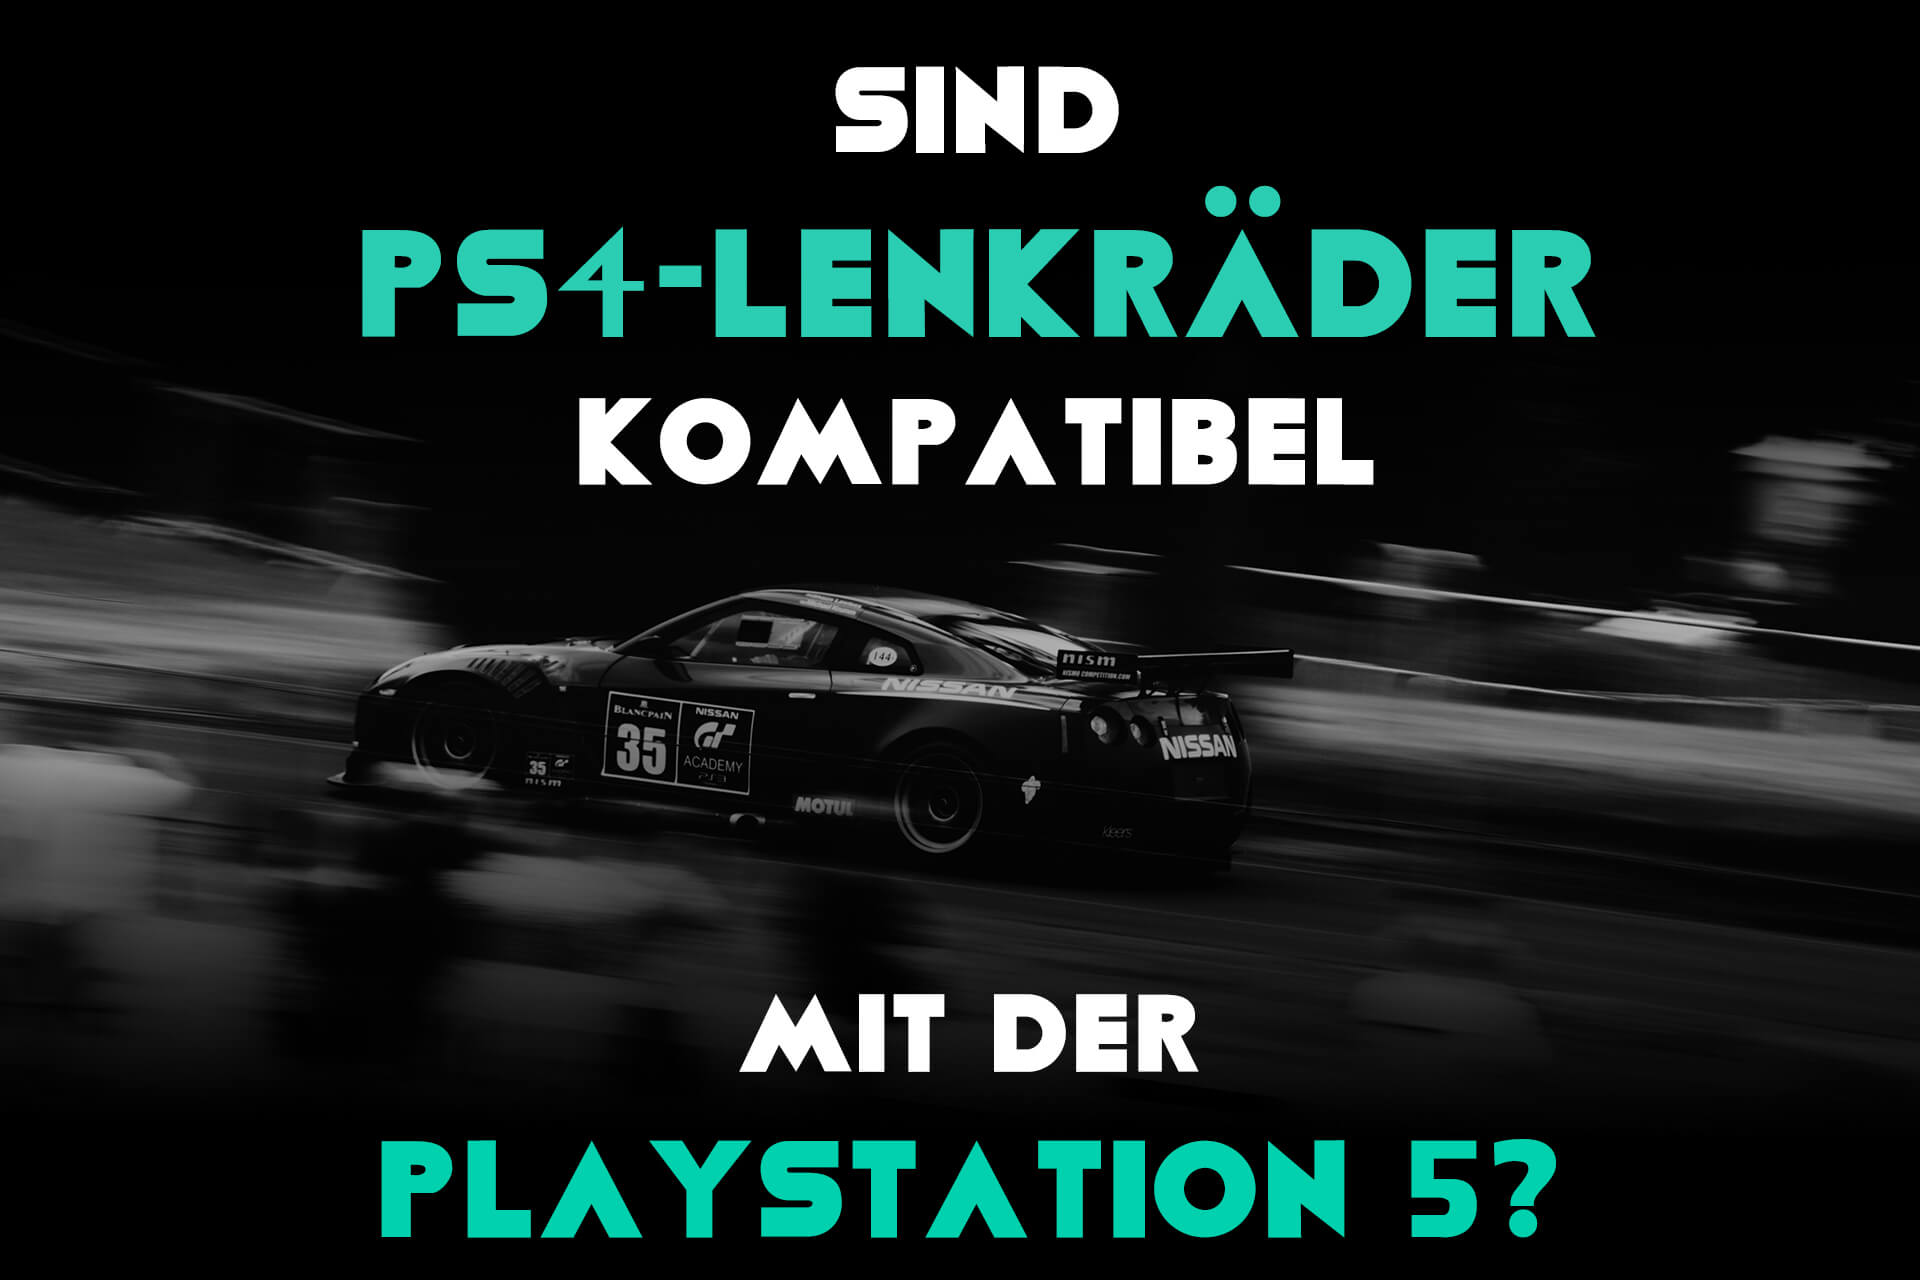 PS4 PS5 Lenkrad und Pedale Sony Playstation Orig. lizensiert F1 2023  PS4/PS5/PC [Neues Modell kompatibel mit PS5] + F1 2023 Formula 1 2023 [PS4]